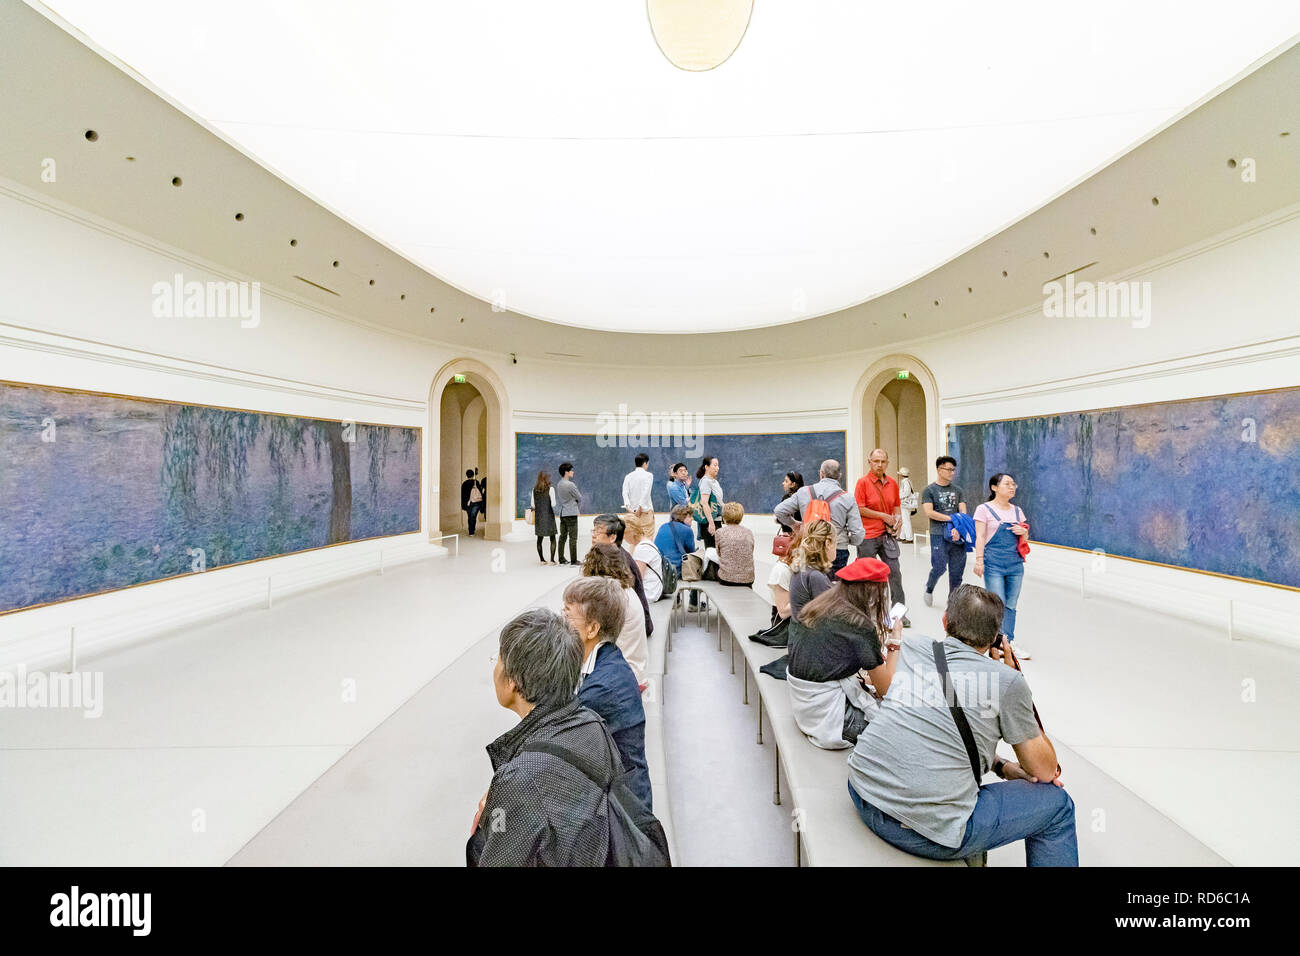 People Admiring The Claude Monet Water Lilies Murals At The Musee De L Orangerie An Art Gallery Located In The West Corner Of The Tuileries Paris Stock Photo Alamy